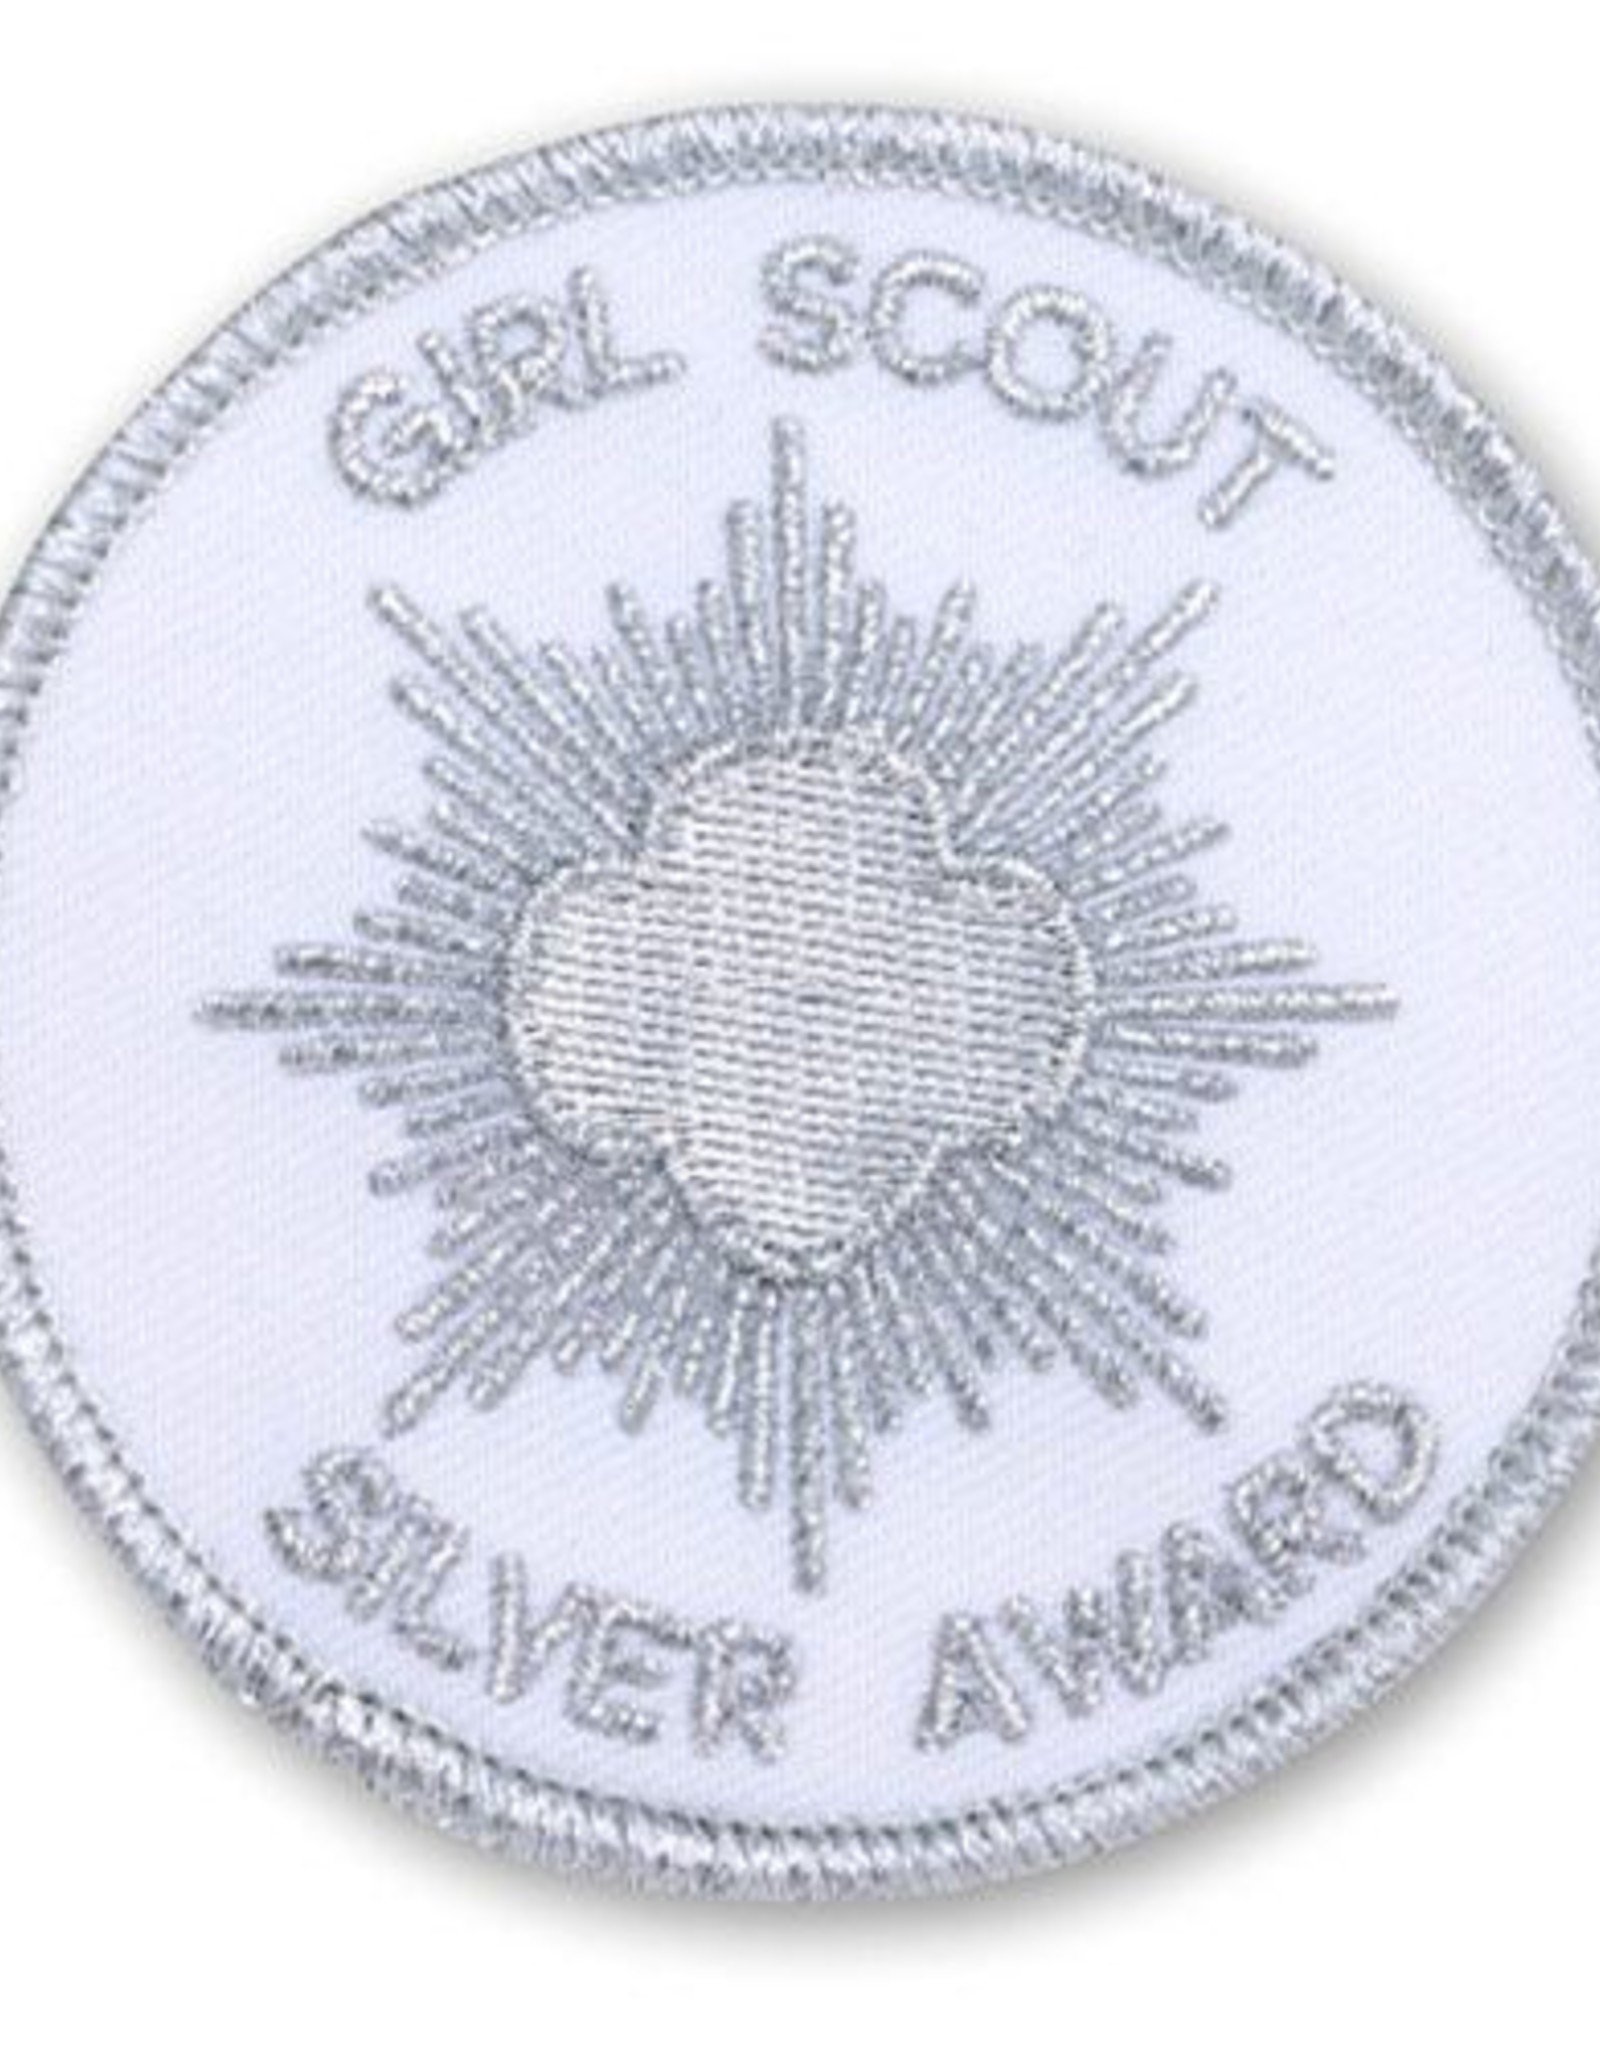 GIRL SCOUTS OF THE USA Silver Award Emblem Circle Patch